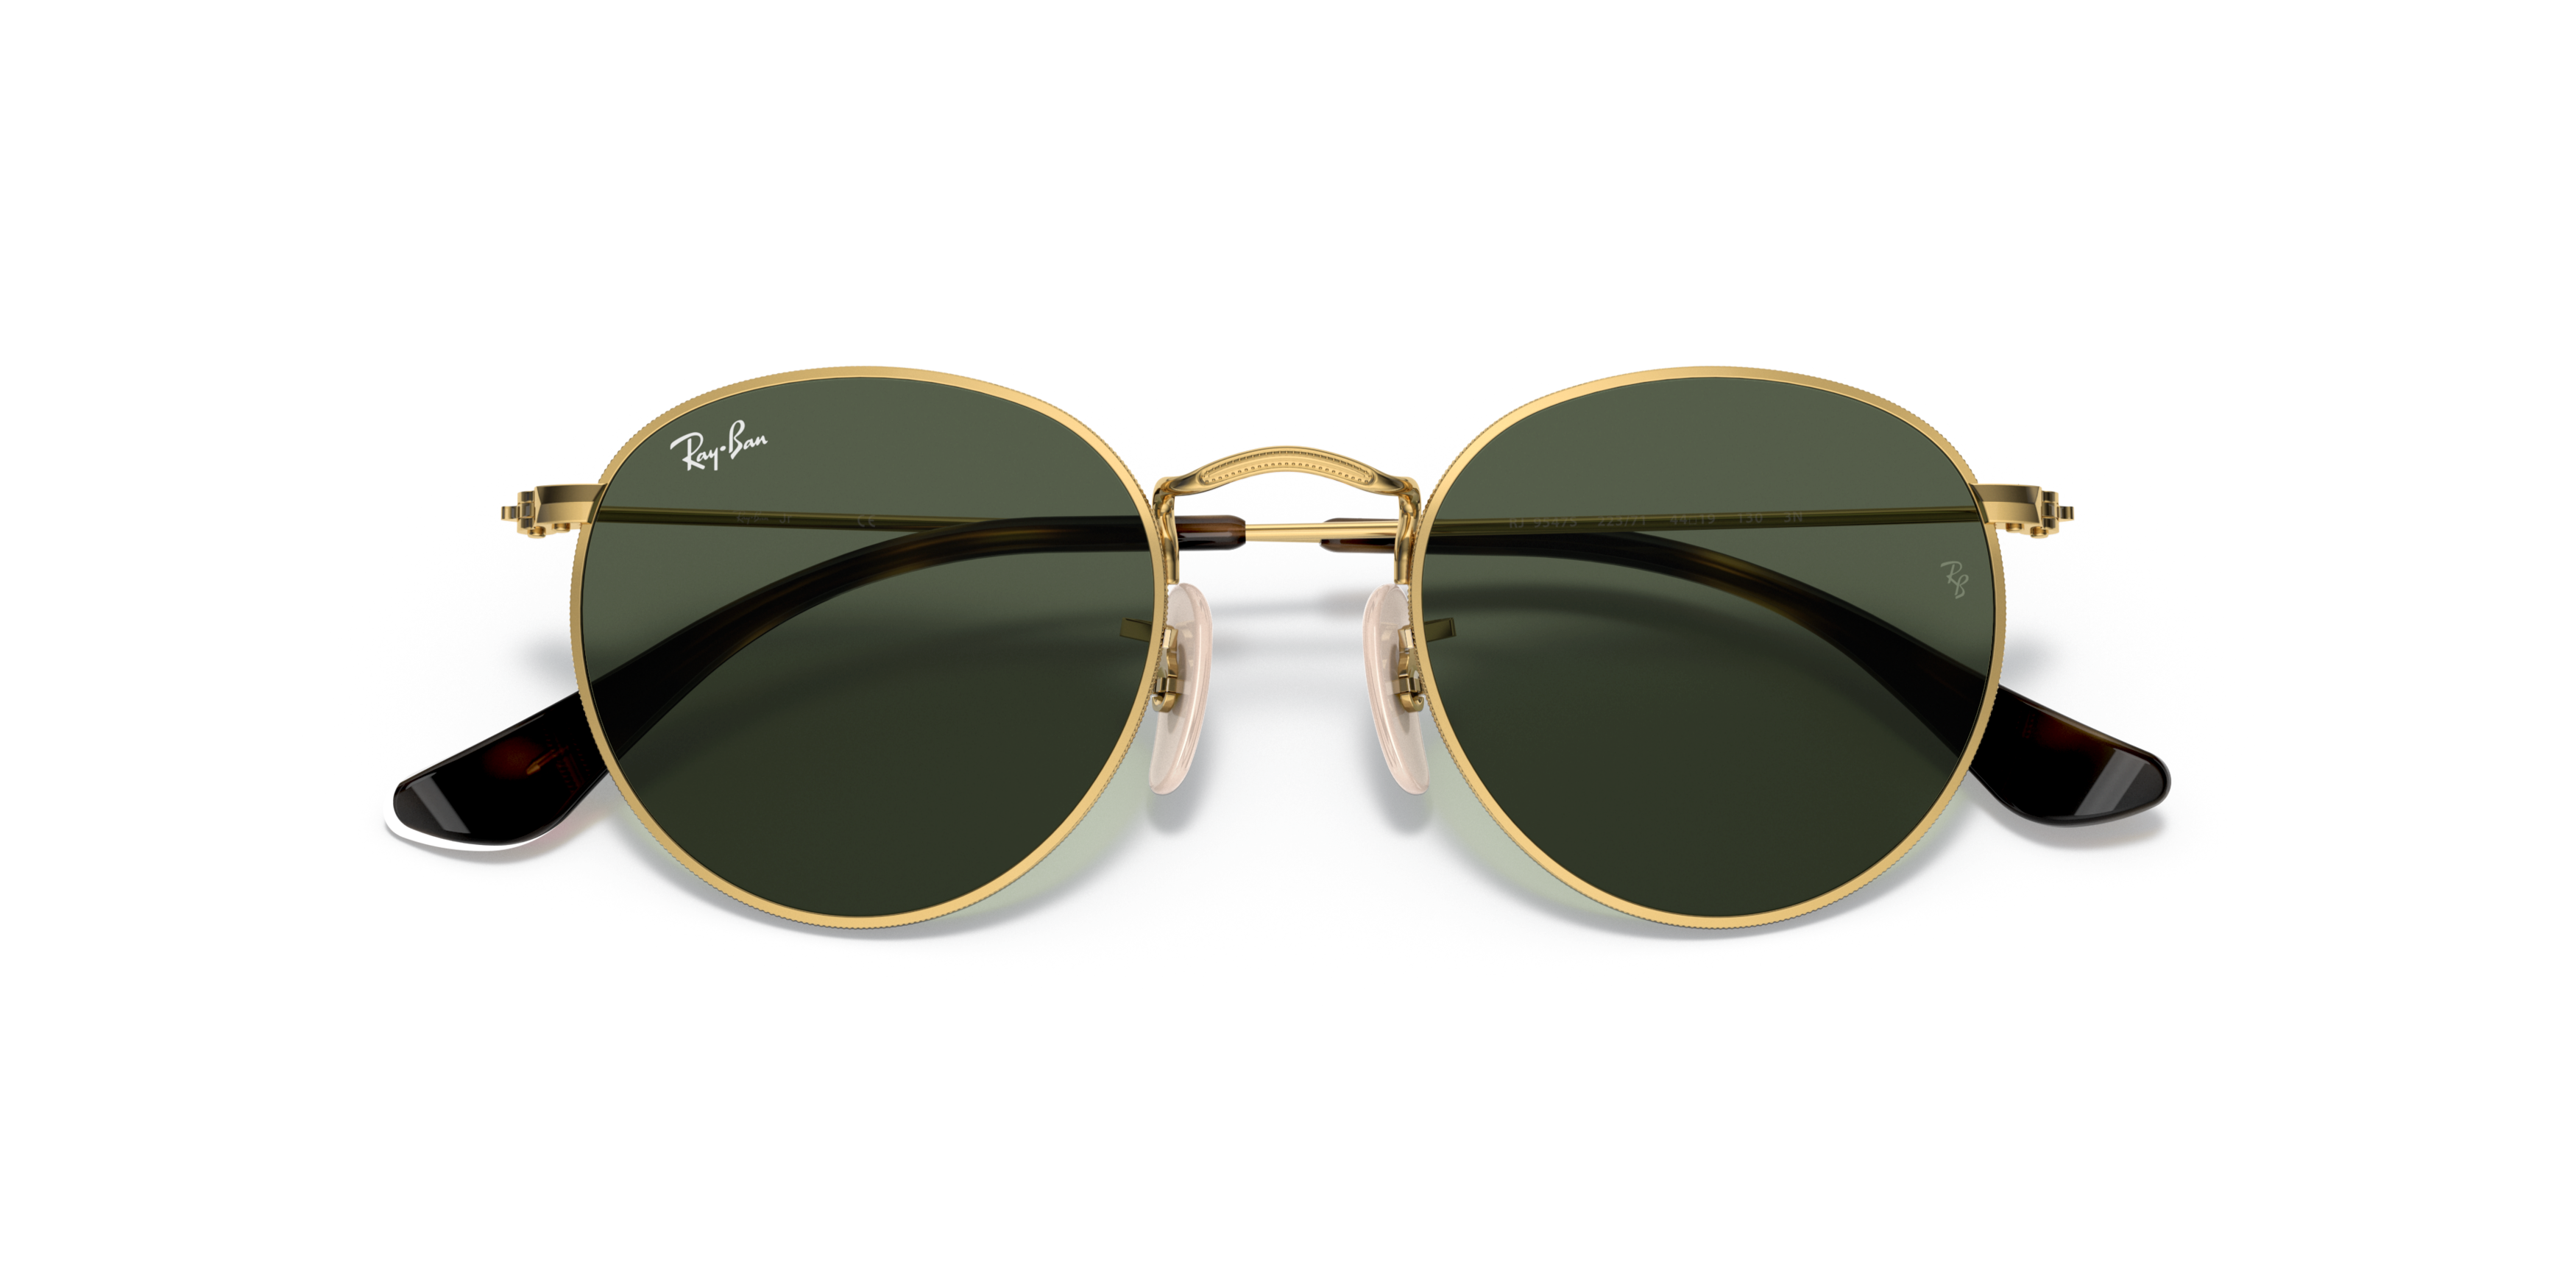 [products.image.folded] RAY-BAN RJ9547S 223/71